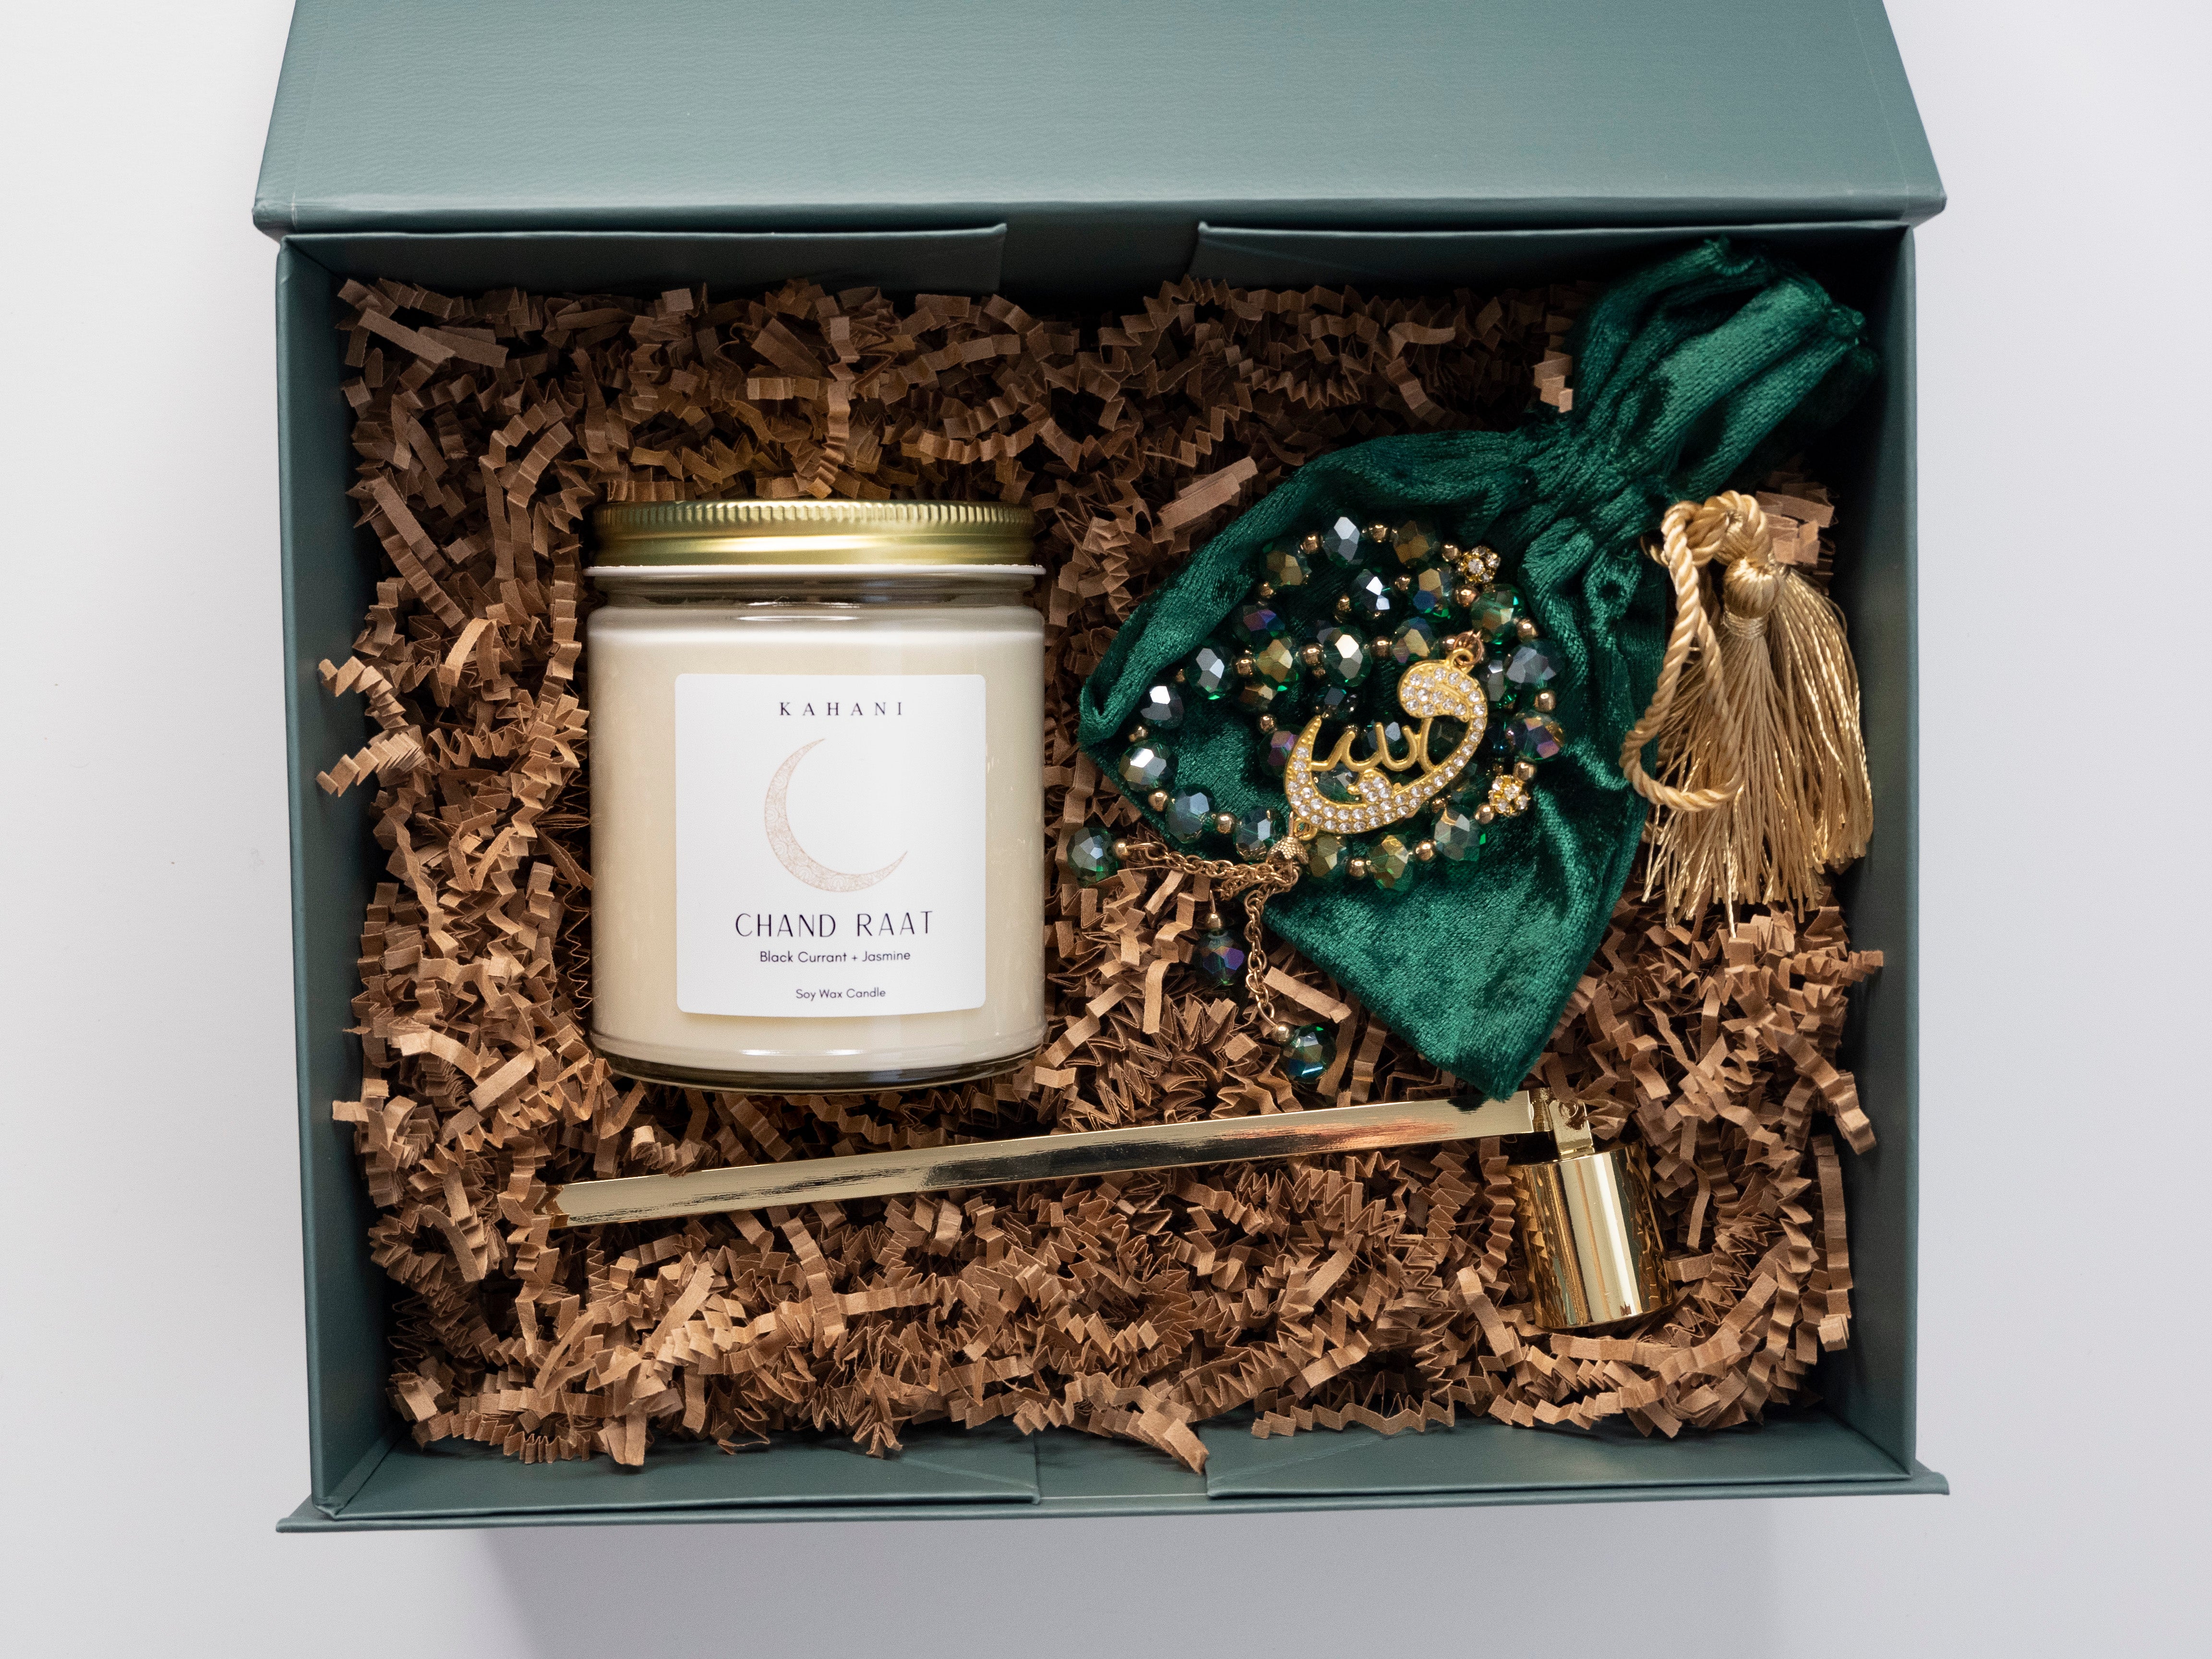 Chand Raat Candle Ensemble Gift Set | The Crescent Collection